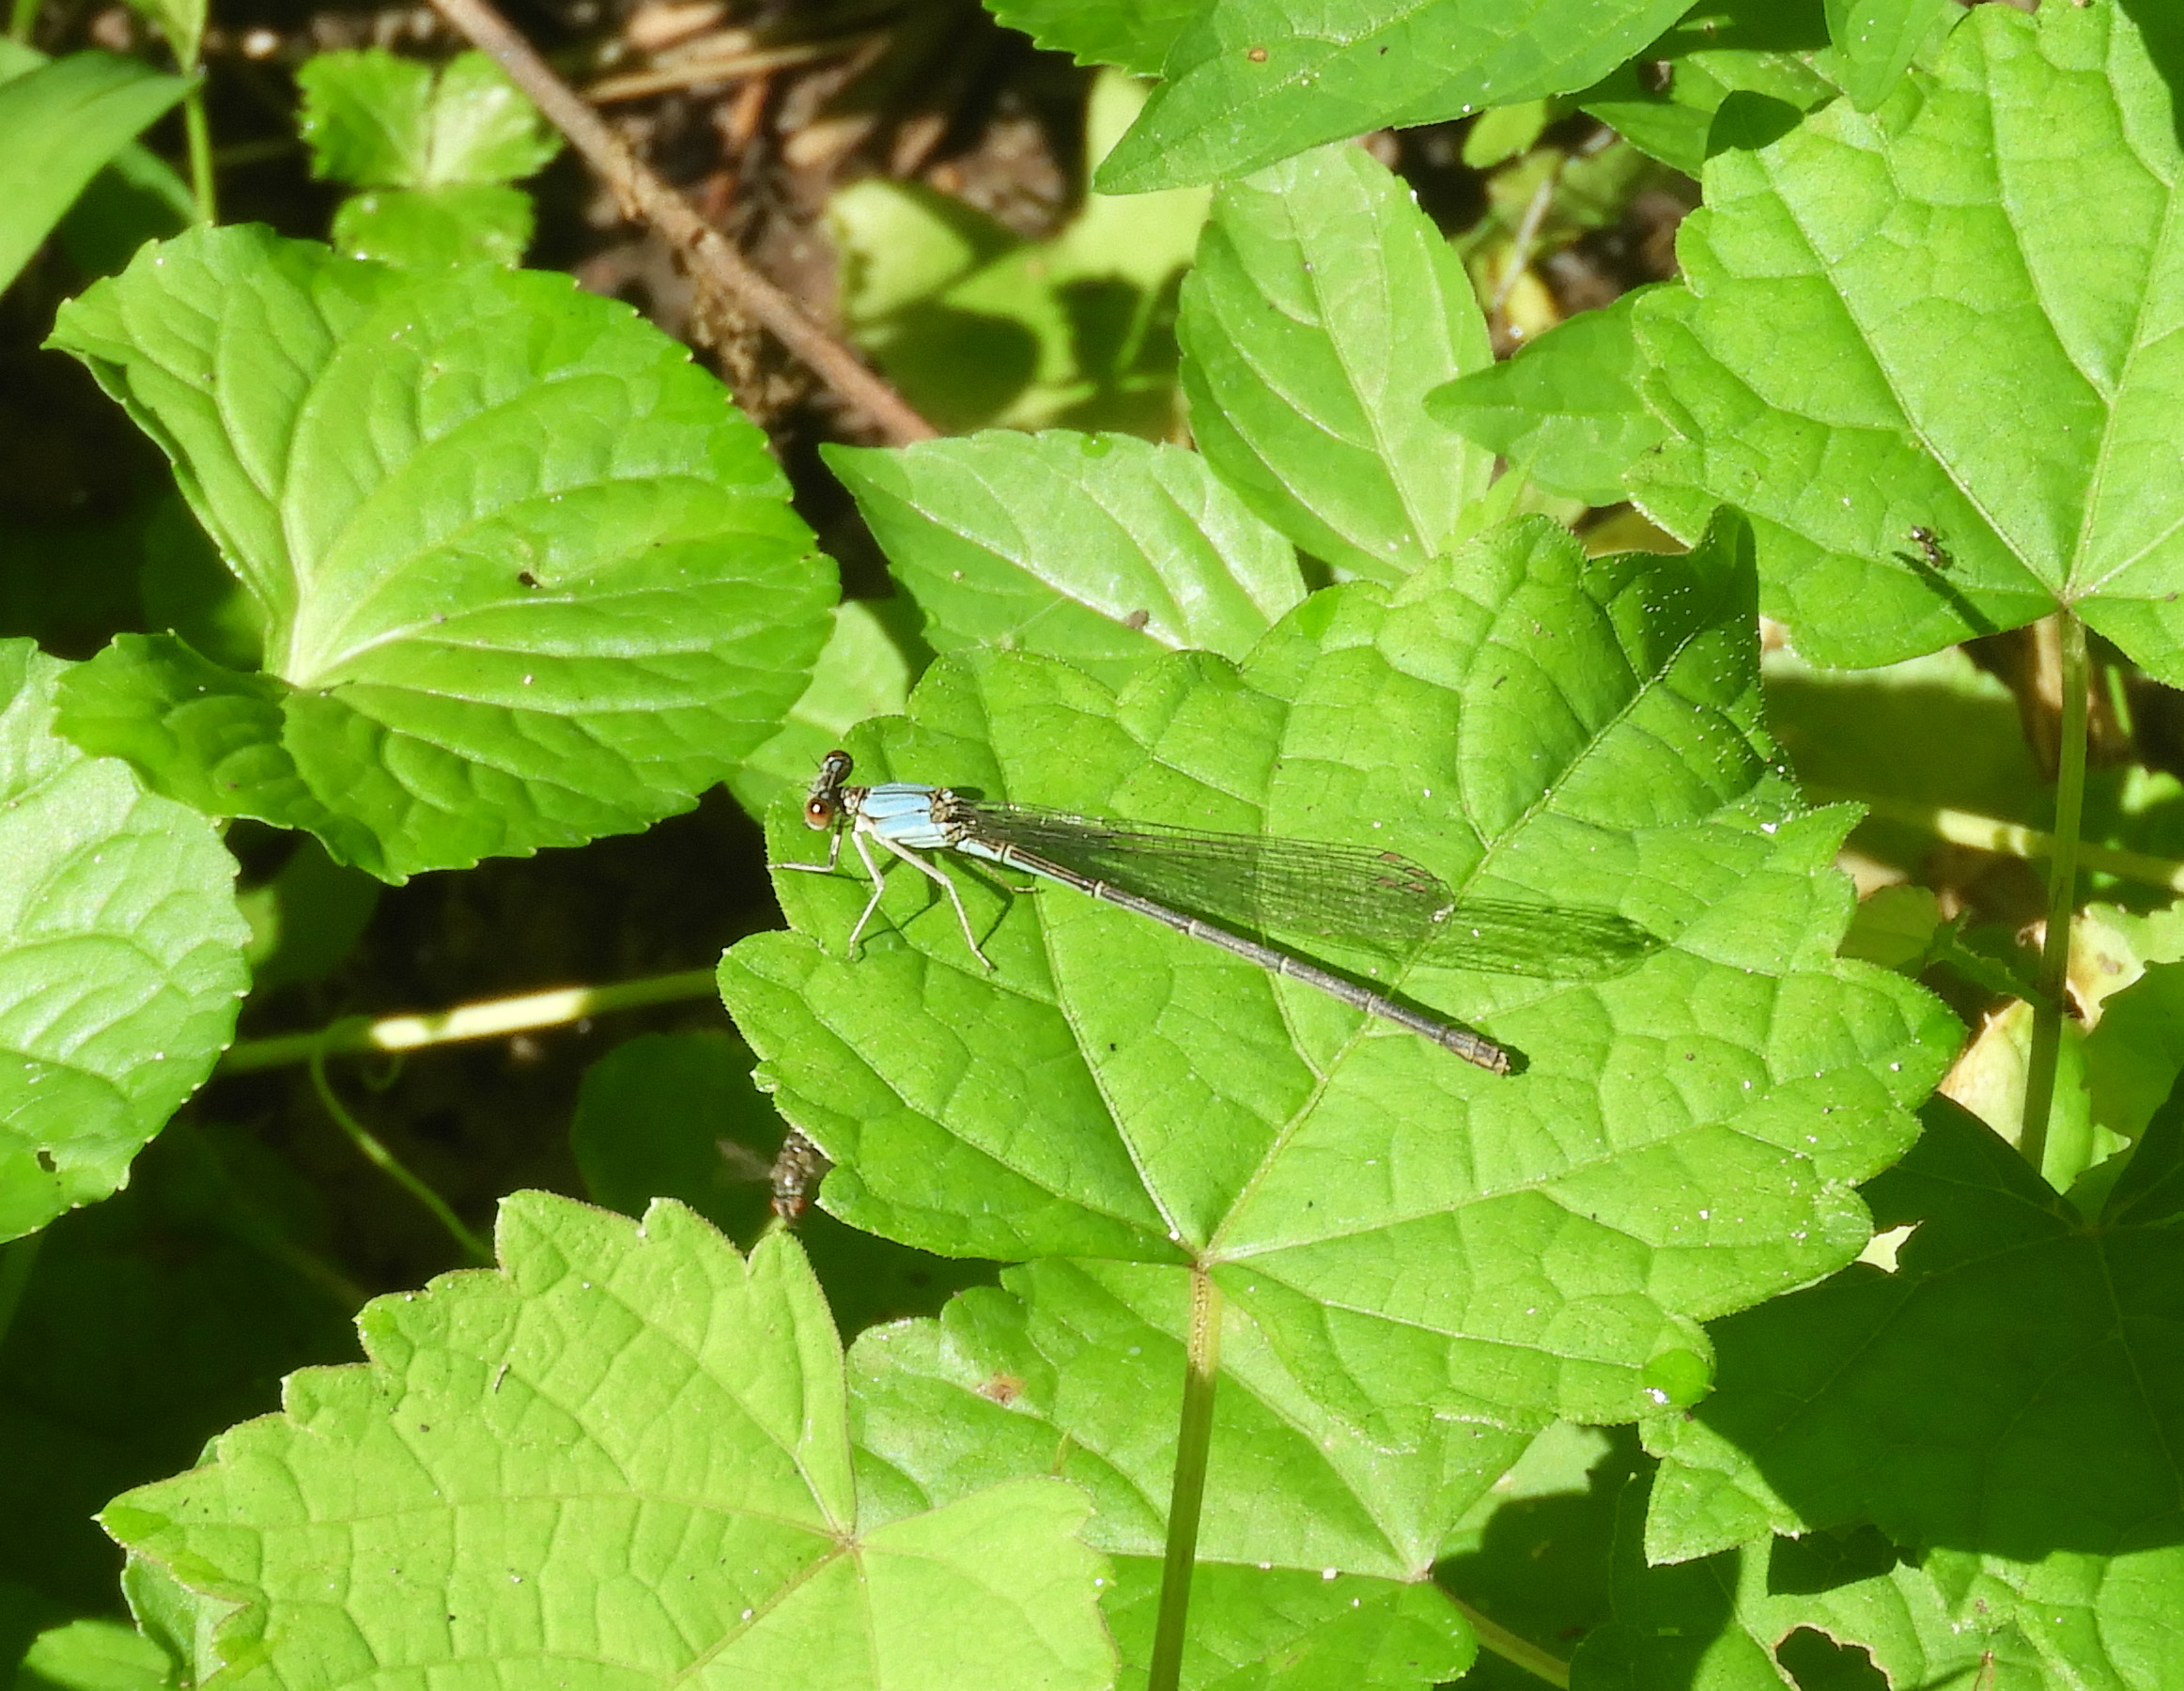 BW Blue fronted dancer damselfly